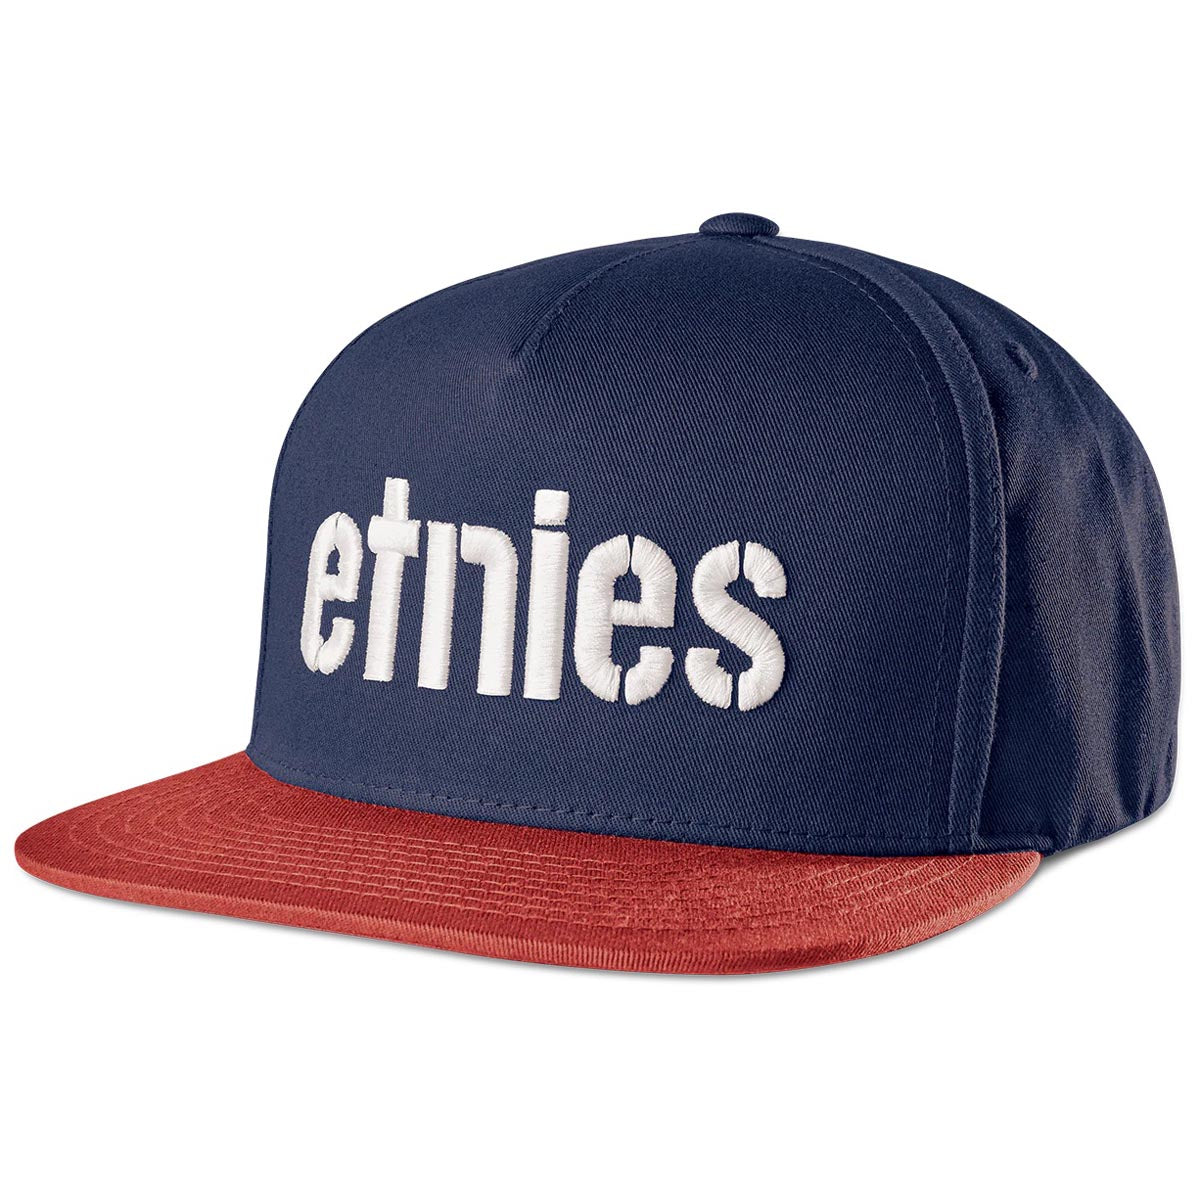 Etnies Corp Snapback Hat - Navy/Red/White image 1